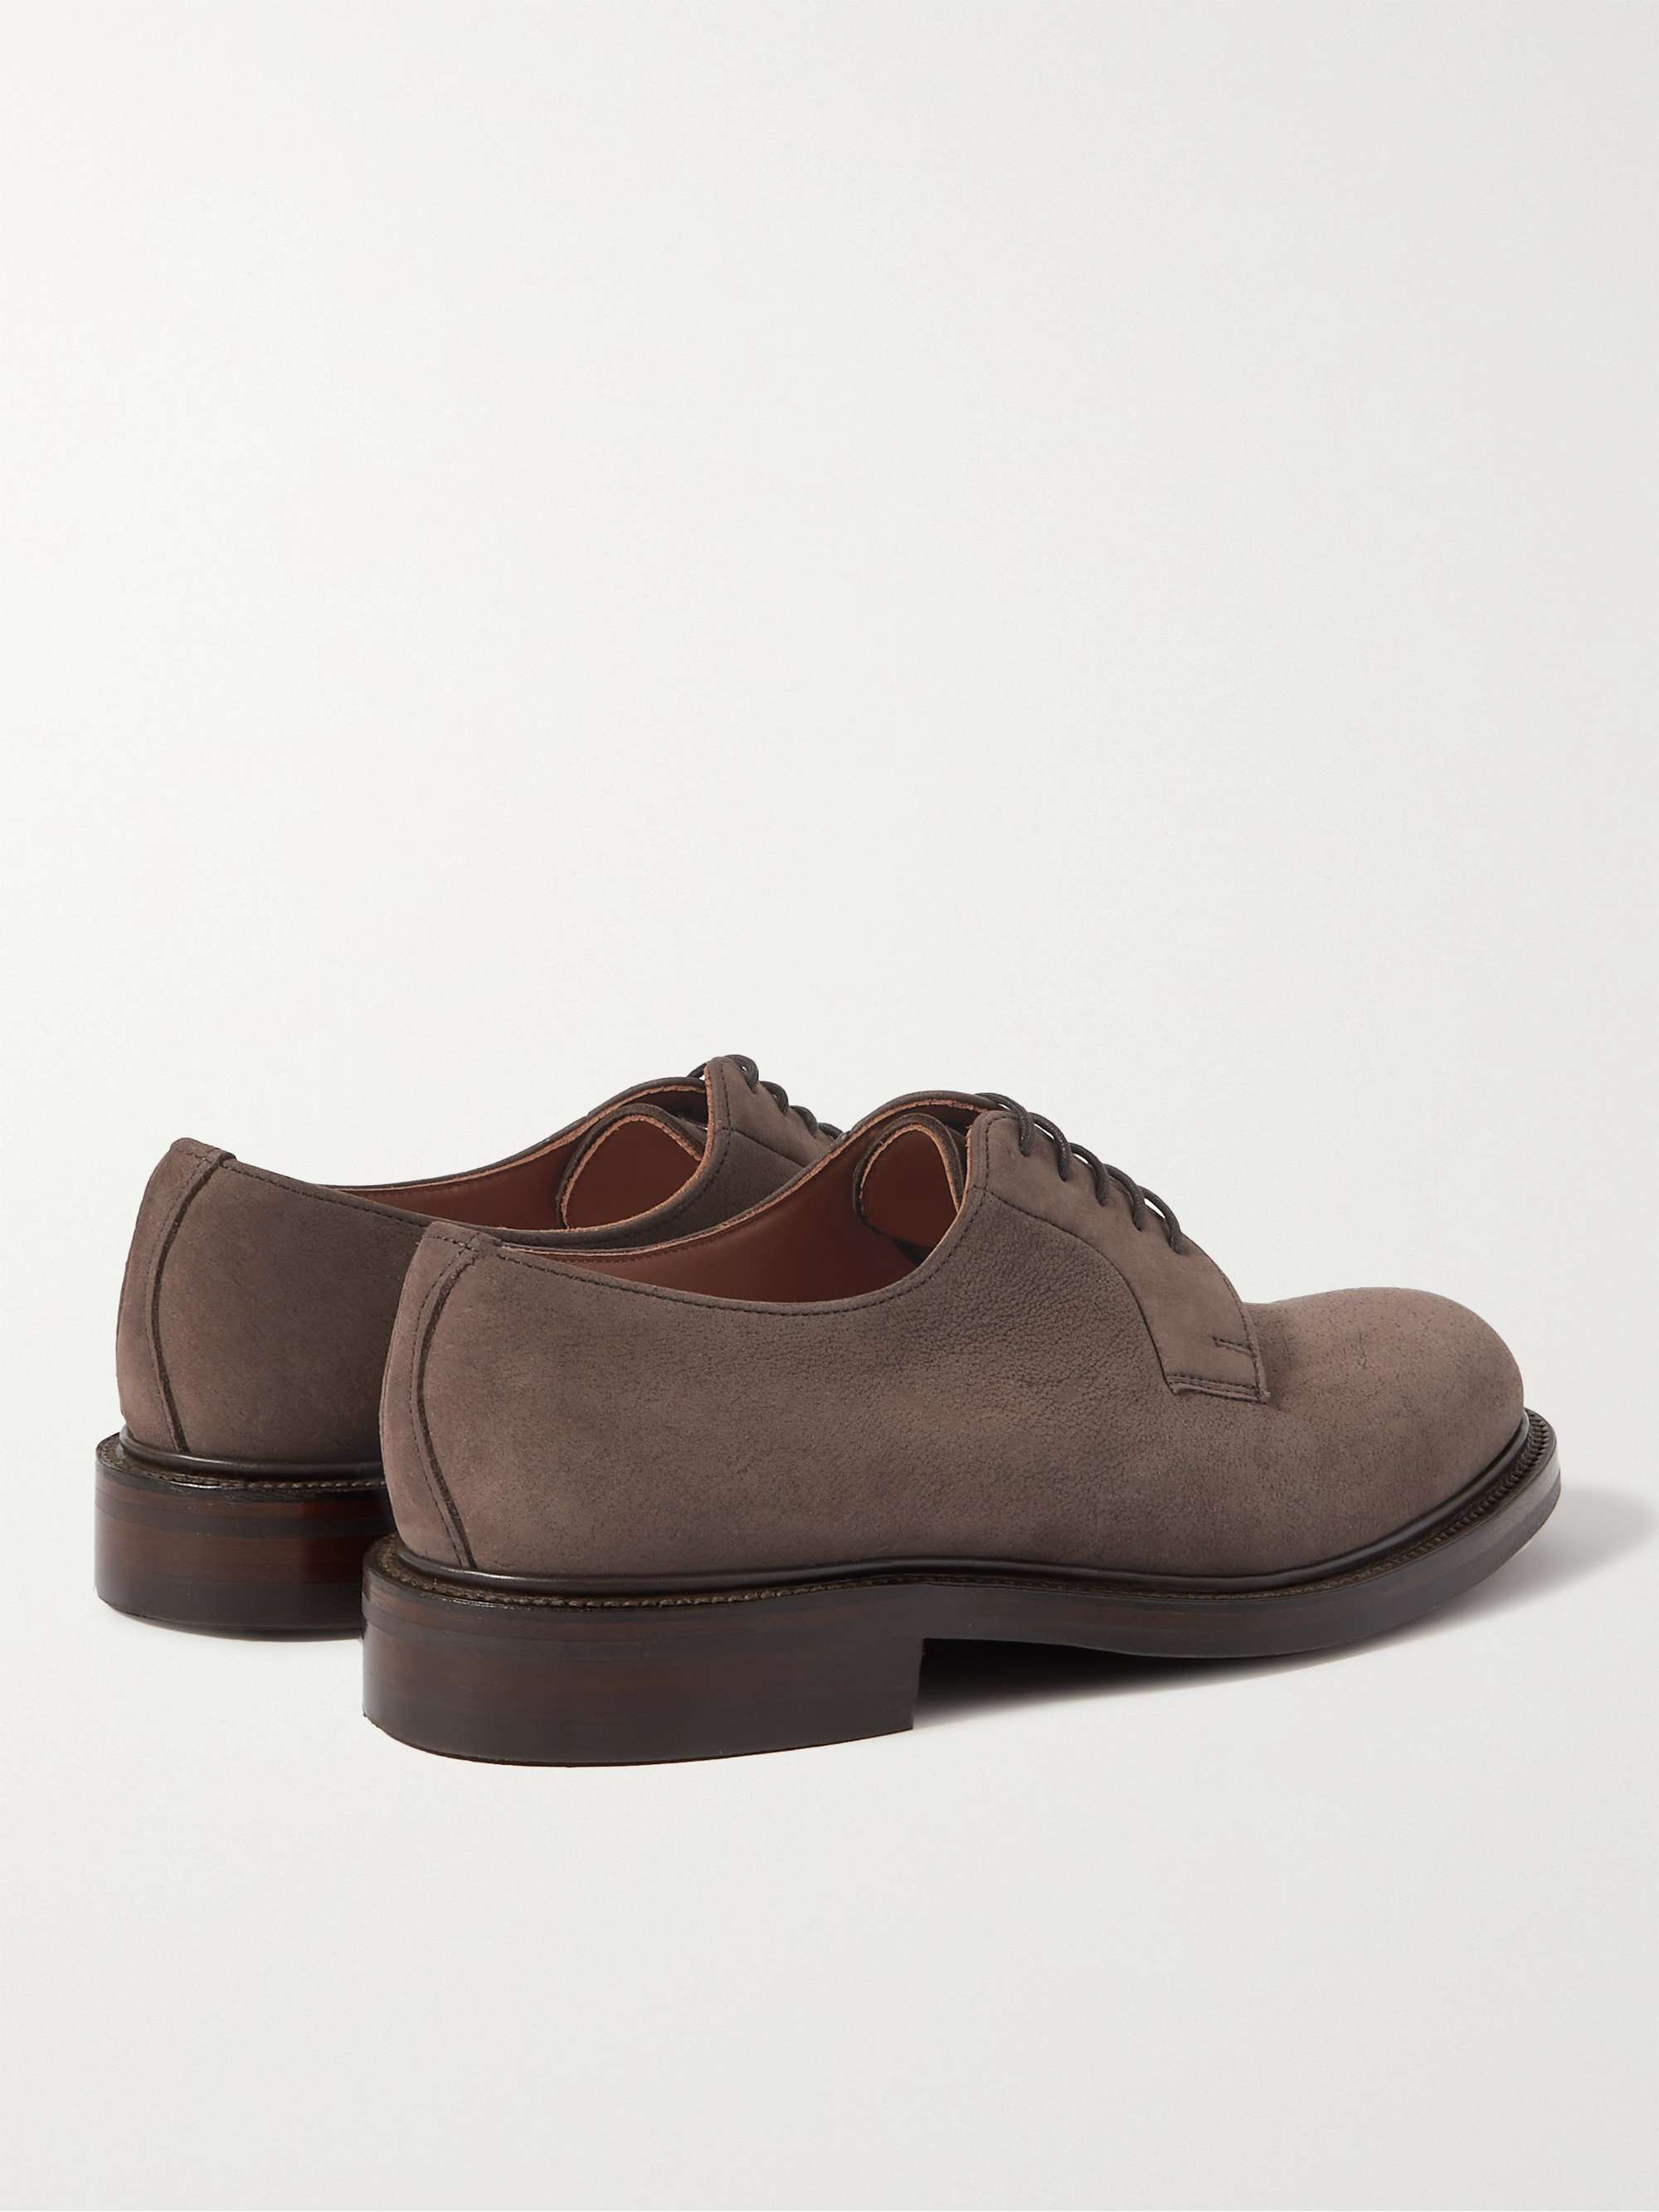 GEORGE CLEVERLEY Archie III Suede Derby Shoe